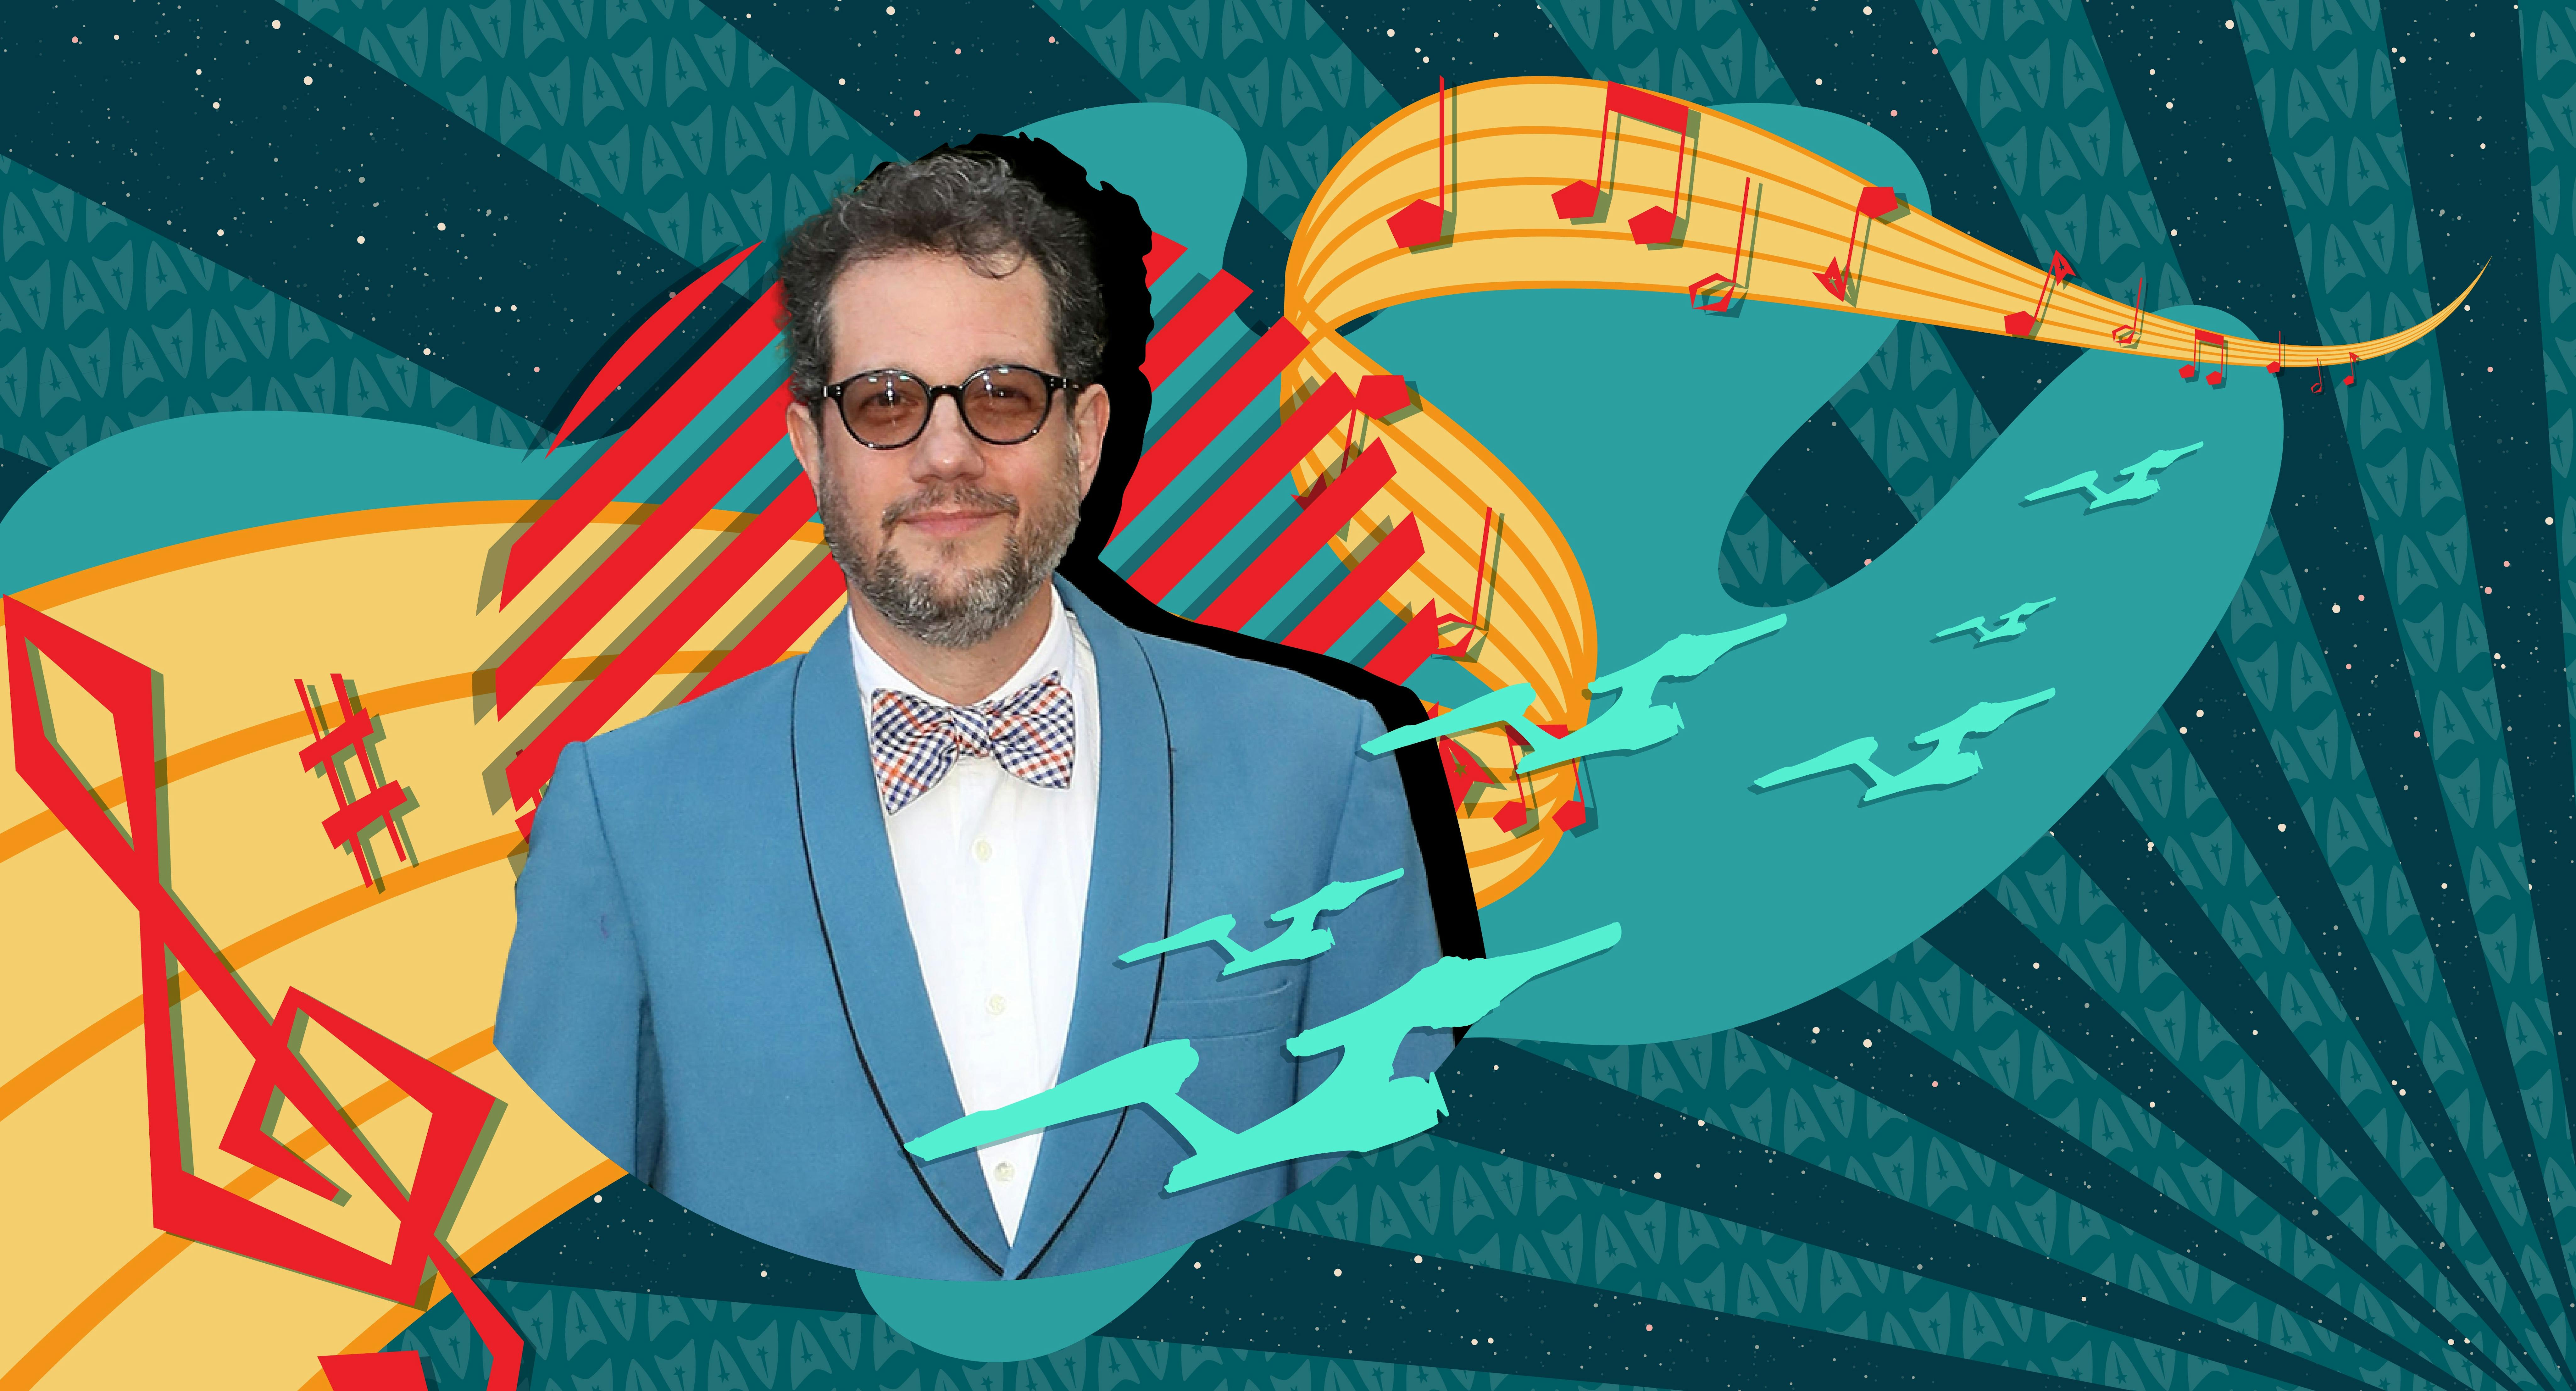 Illustrated banner with Michael Giacchino